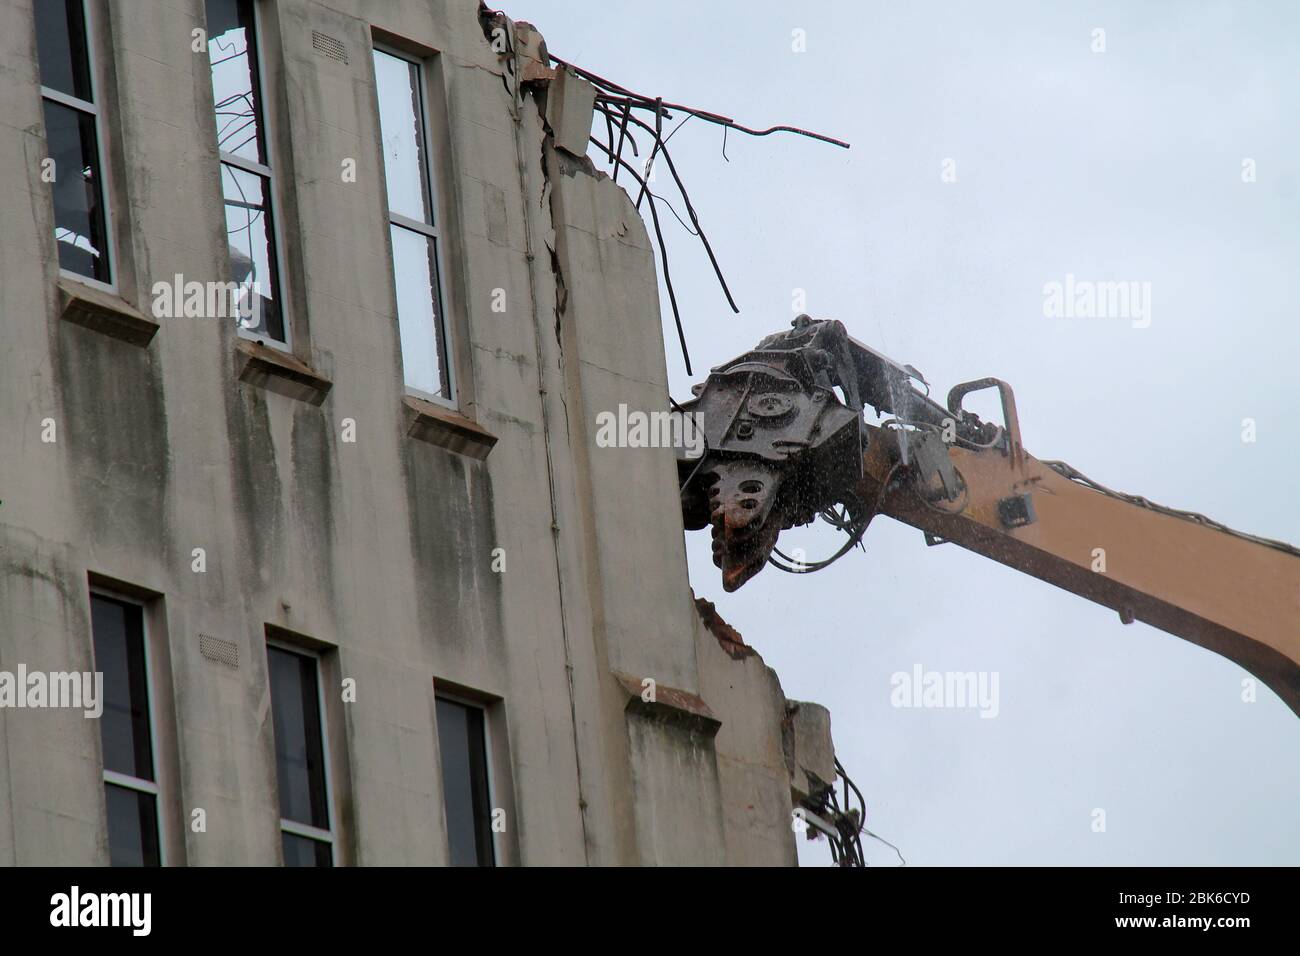 The Jaws of an Excavator Demolishing a Building. Stock Photo